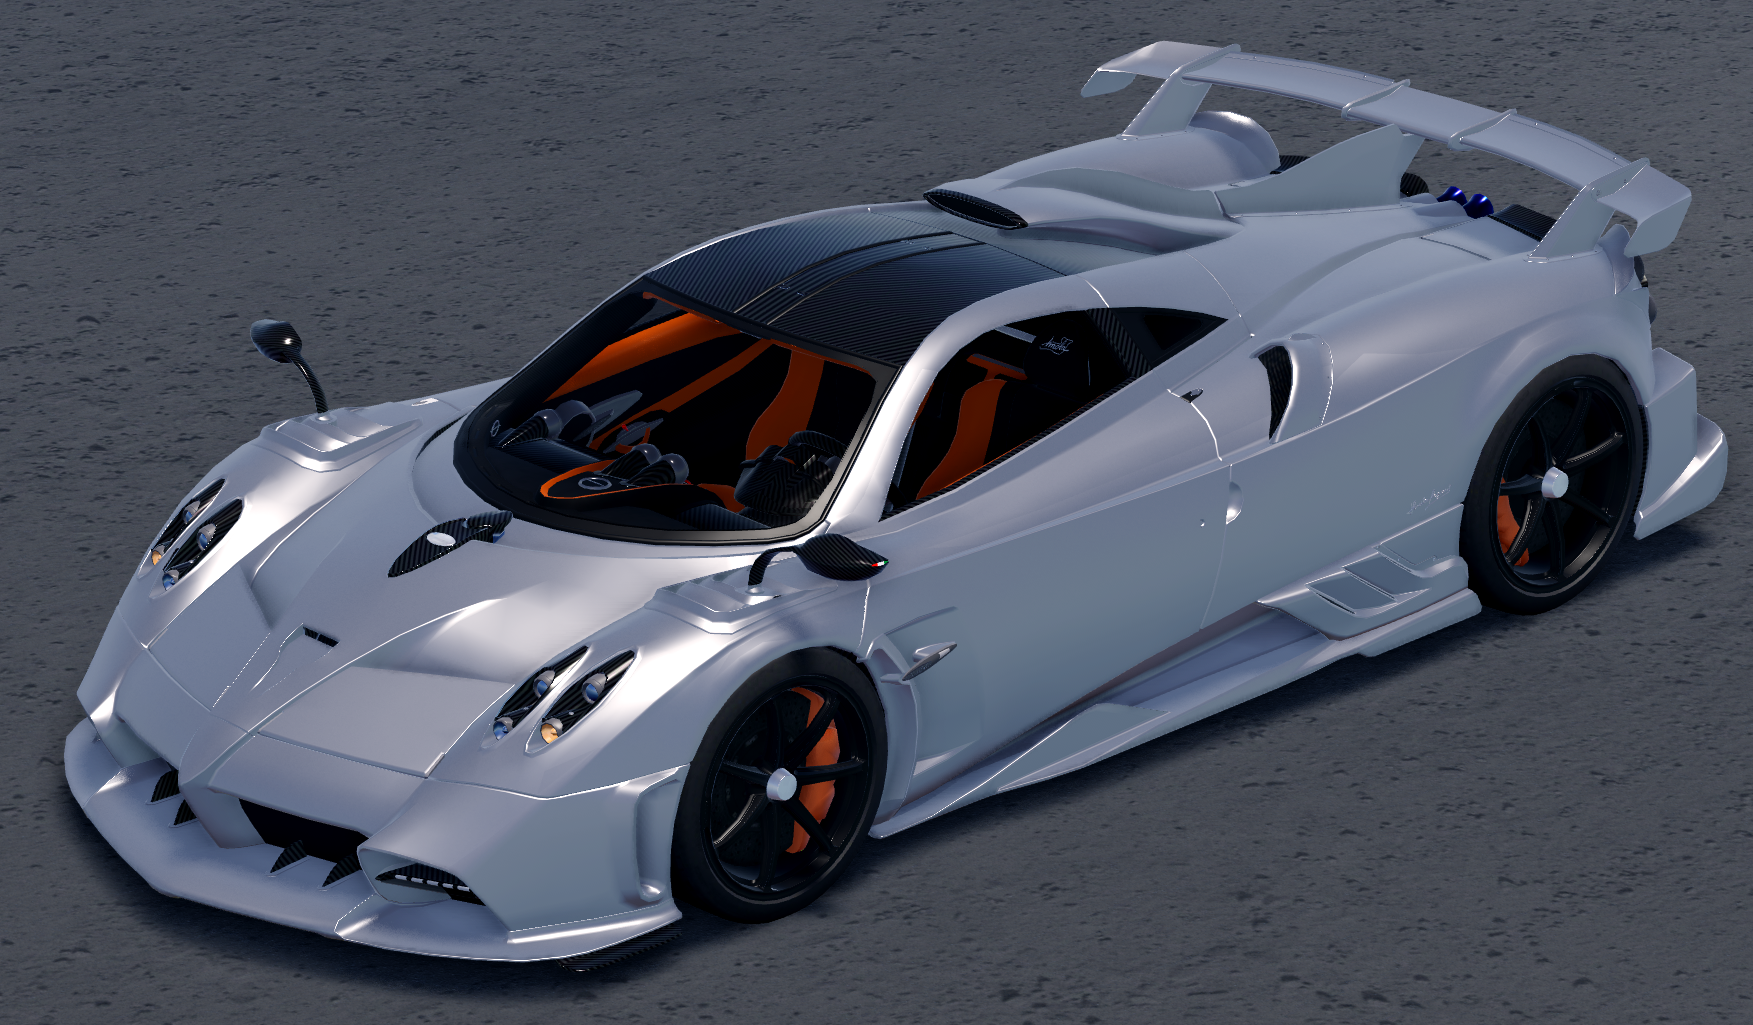 https://static.wikia.nocookie.net/wayfort/images/7/74/2020_Pagani_Huayra_Imola.png/revision/latest?cb=20231125011401